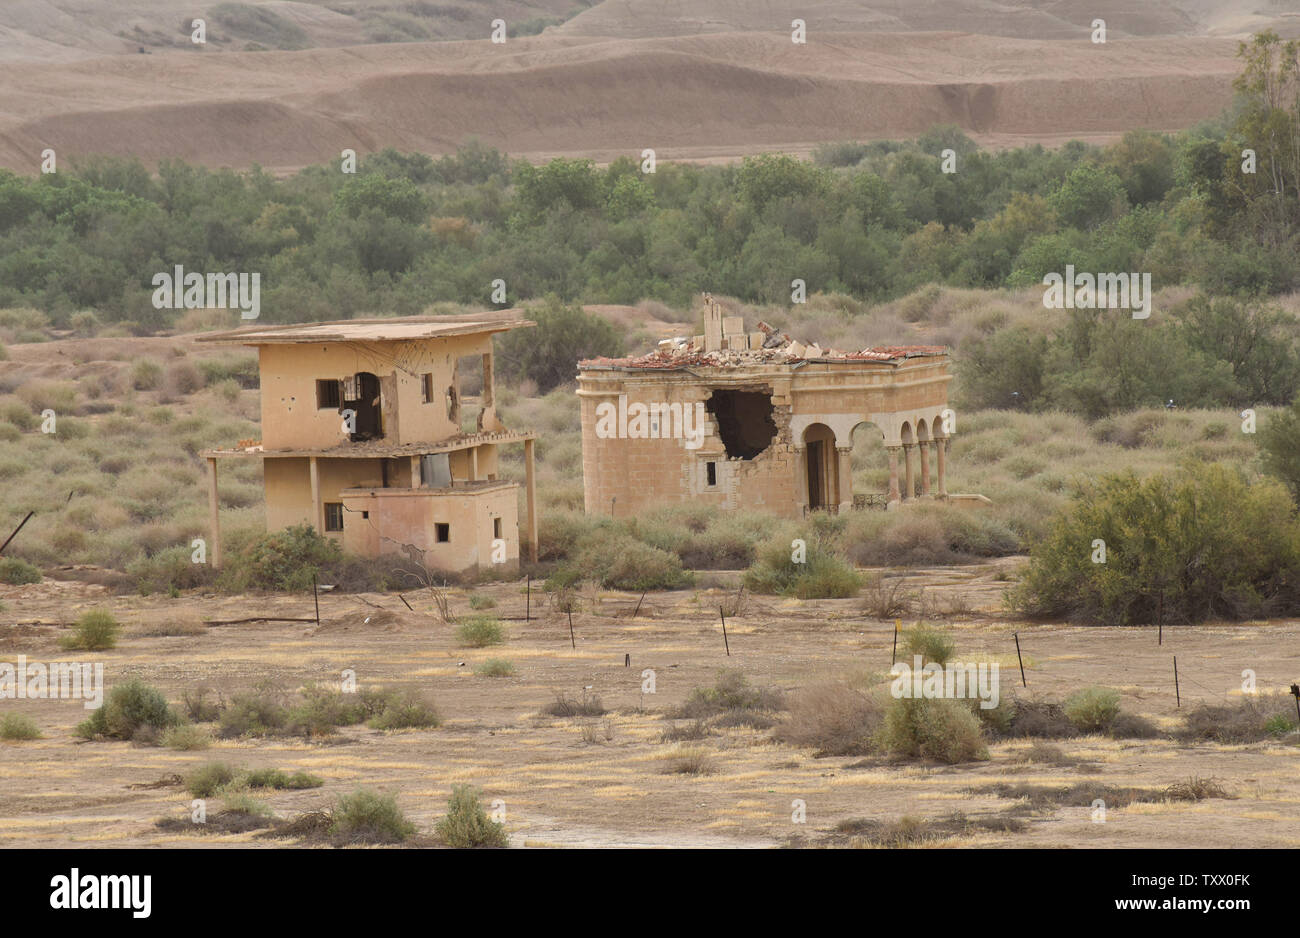 An overview of abandoned church properties in an area full of land mines near the Qasr Al-Yahud baptism site along the Jordan River, near Jericho in the West Bank, March 29, 2018.  Halo Trust, an international land mine clearance charity, in cooperation with the Israeli National Mine Action Authority, under the Defense Ministry and the Palestinian Authority, has started removing the mines, which include anti-personal mines, anti-tank mines and other explosive remnants of war. The Israel Defense Ministry expects to clear approximately 3,000 targets. Photo by Debbie Hill/UPI Stock Photo